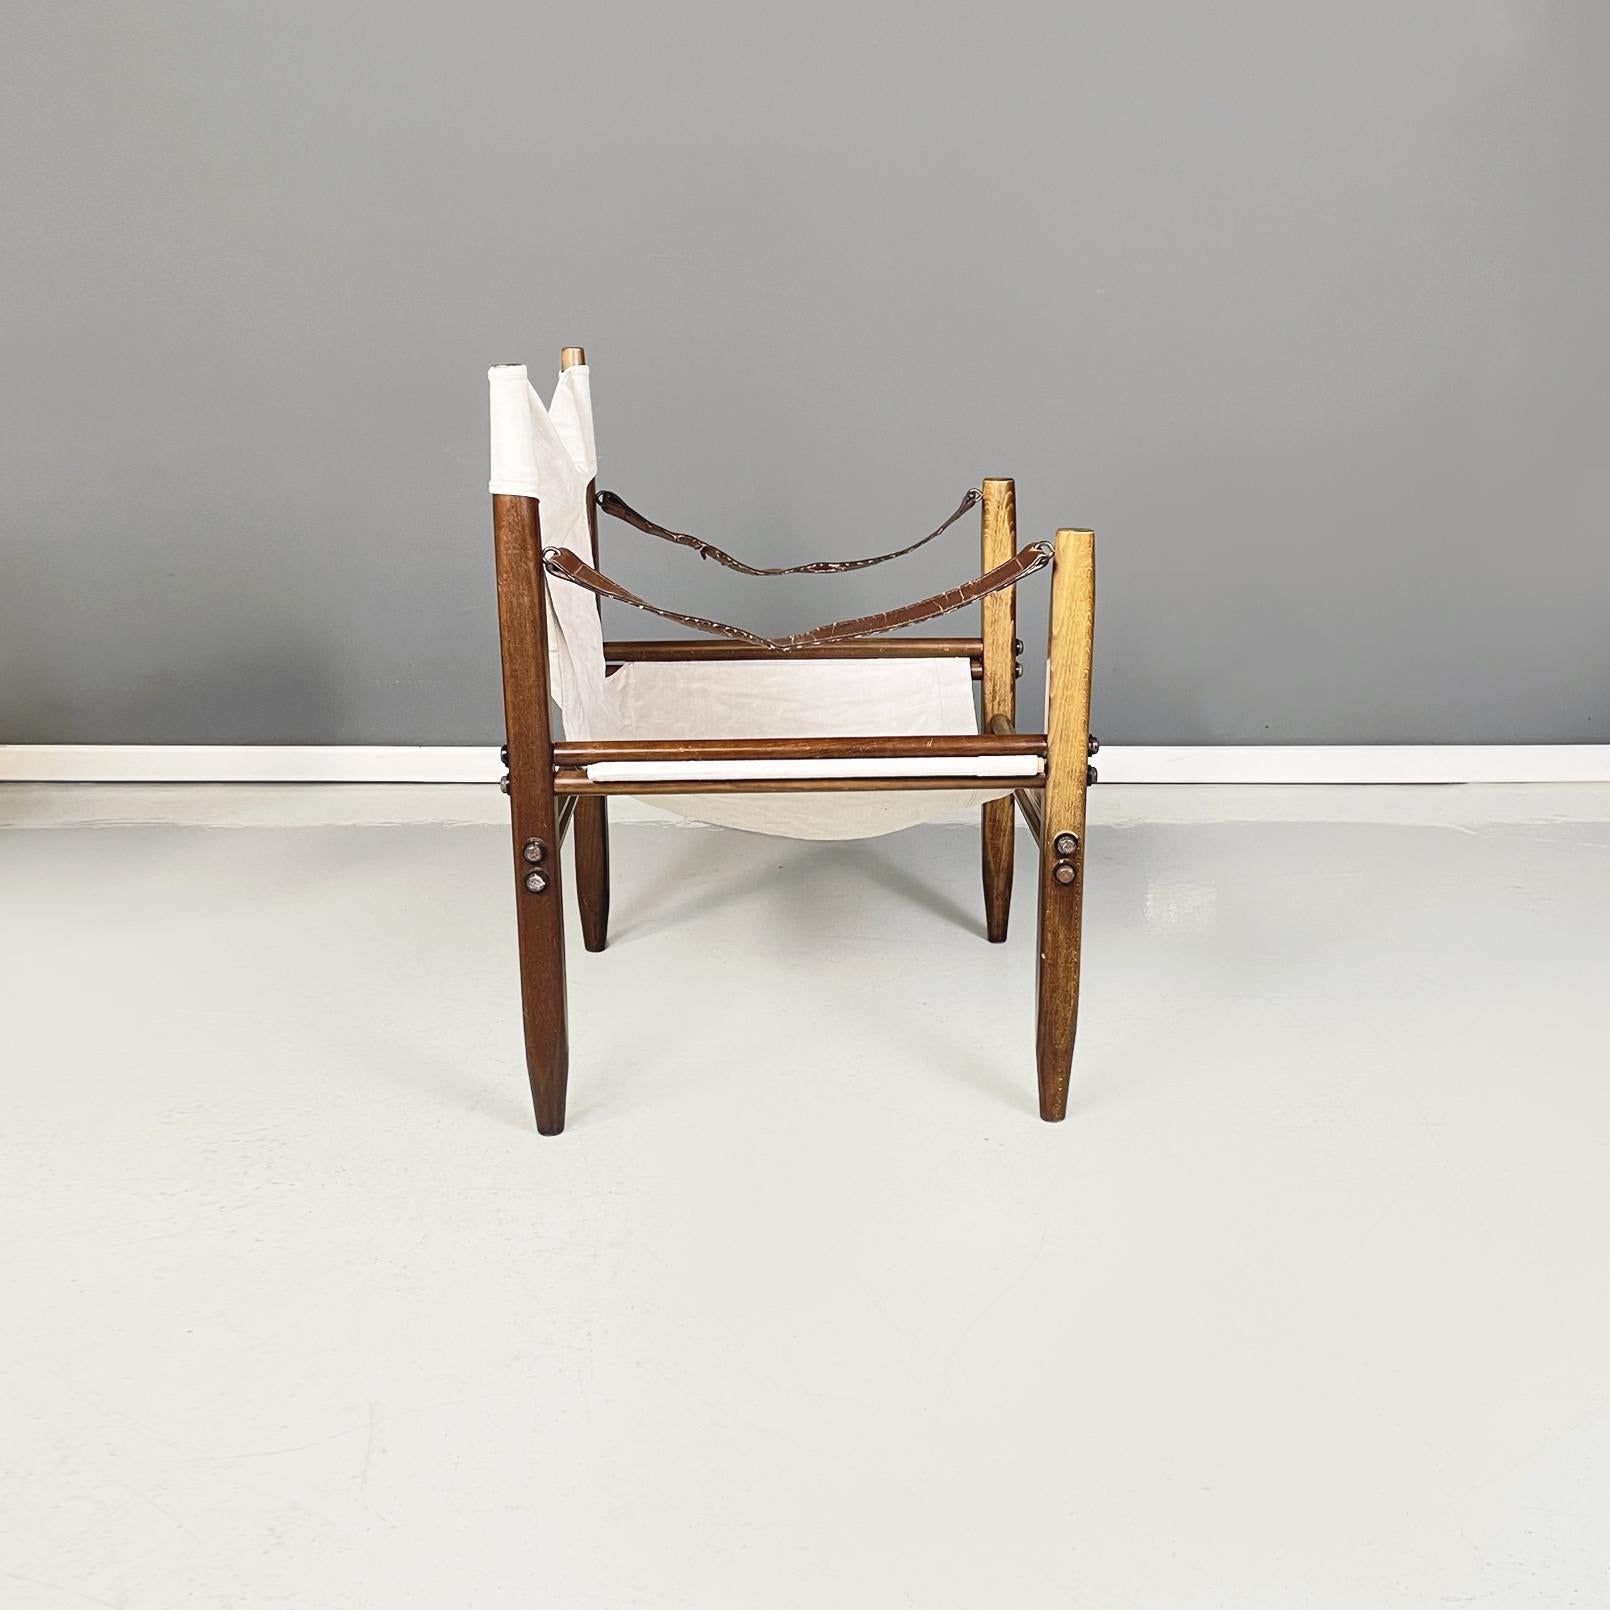 Italian Midcentury Armchairs Oasi 85 by Gian Franco Legler for Zanotta, 1960s In Good Condition For Sale In MIlano, IT